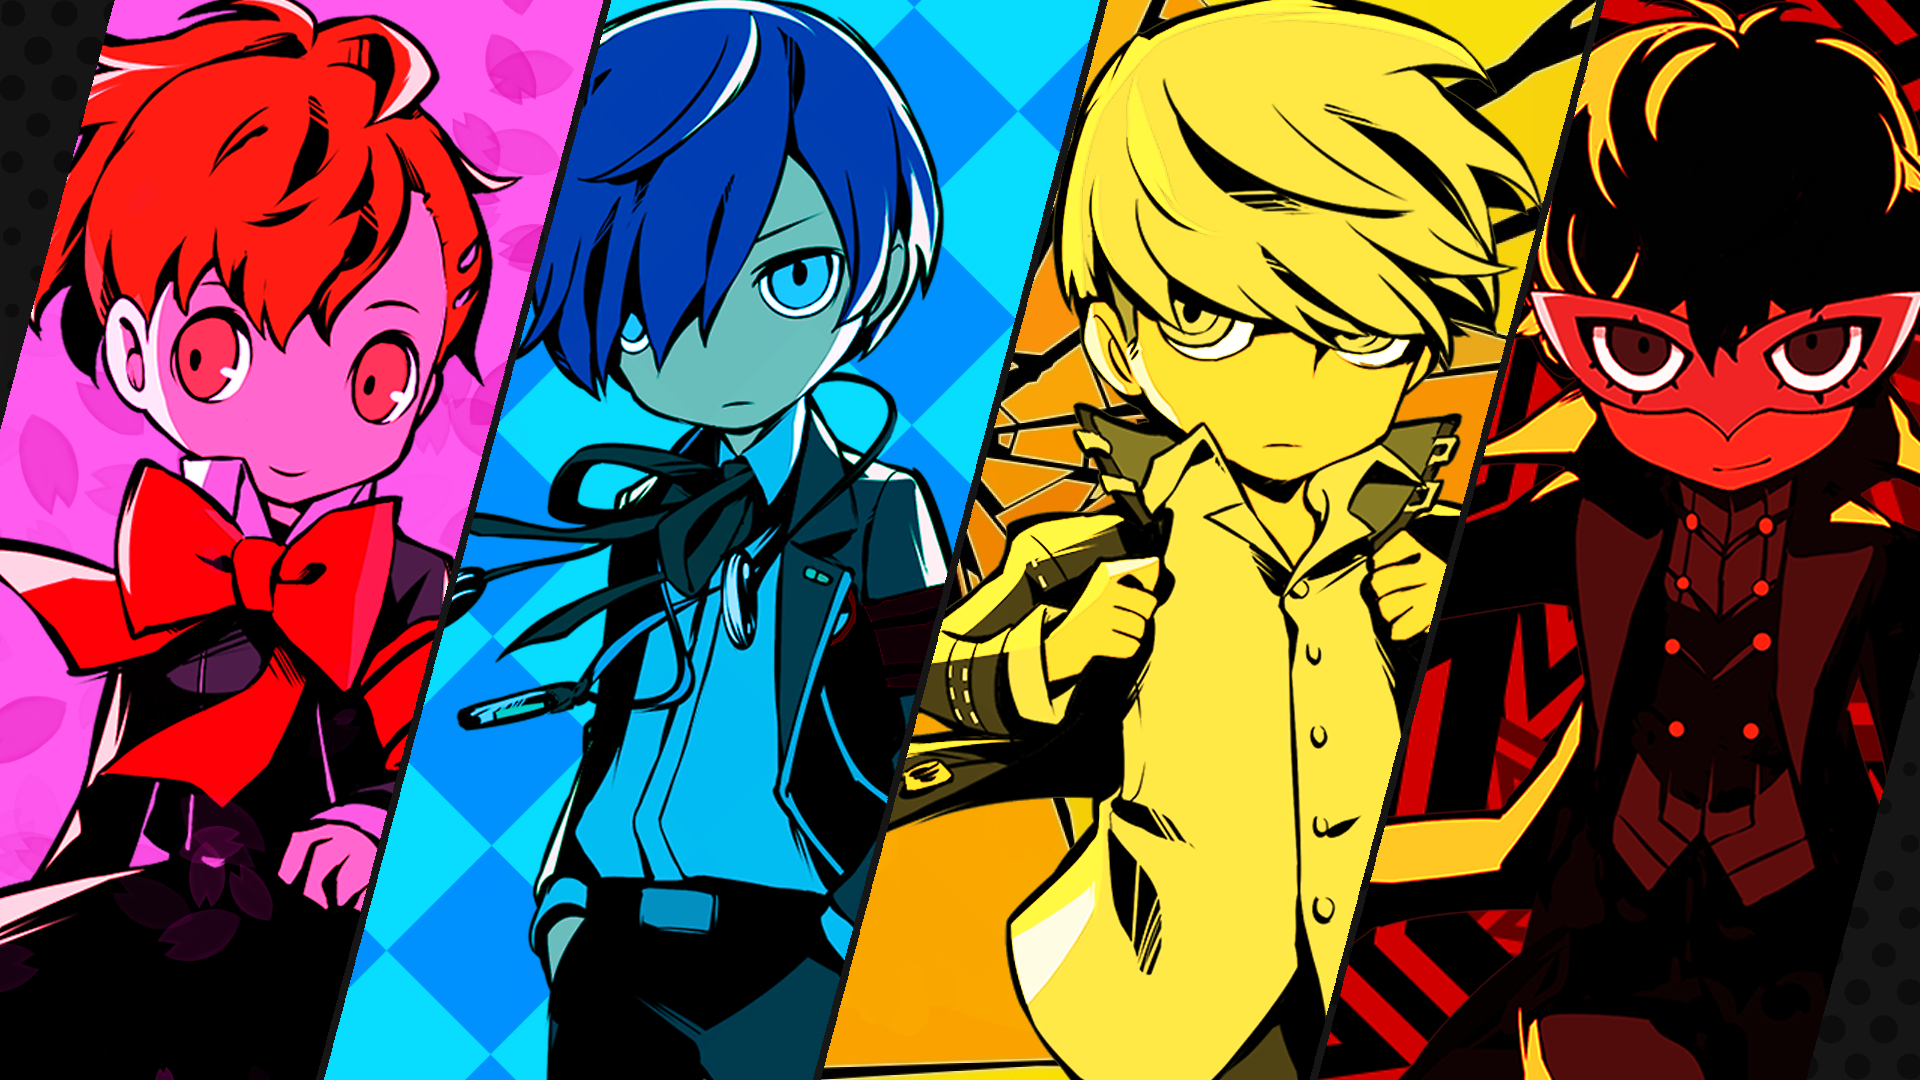 1920x1080 Persona Q2 Wallpapers Top Free Persona Q2 Backgrounds